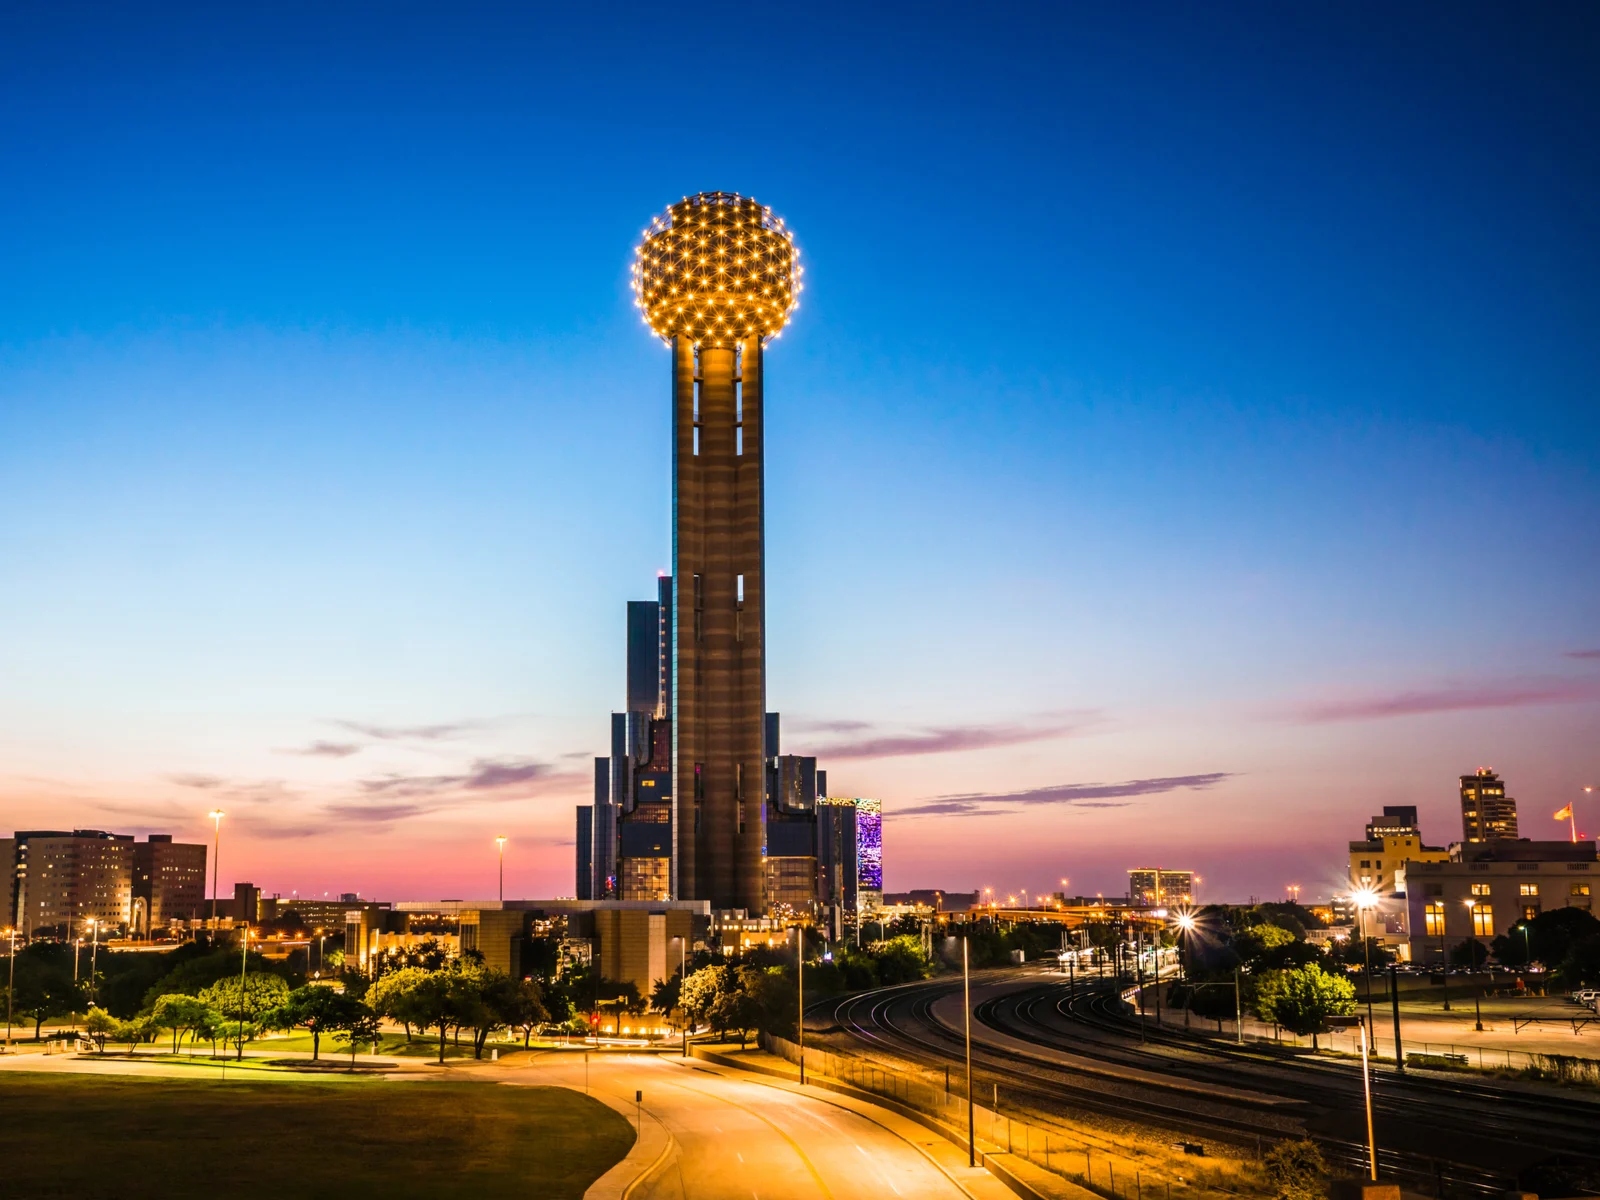 One of the best things to do in Dallas, Reunion Tower, pictured at nightfall